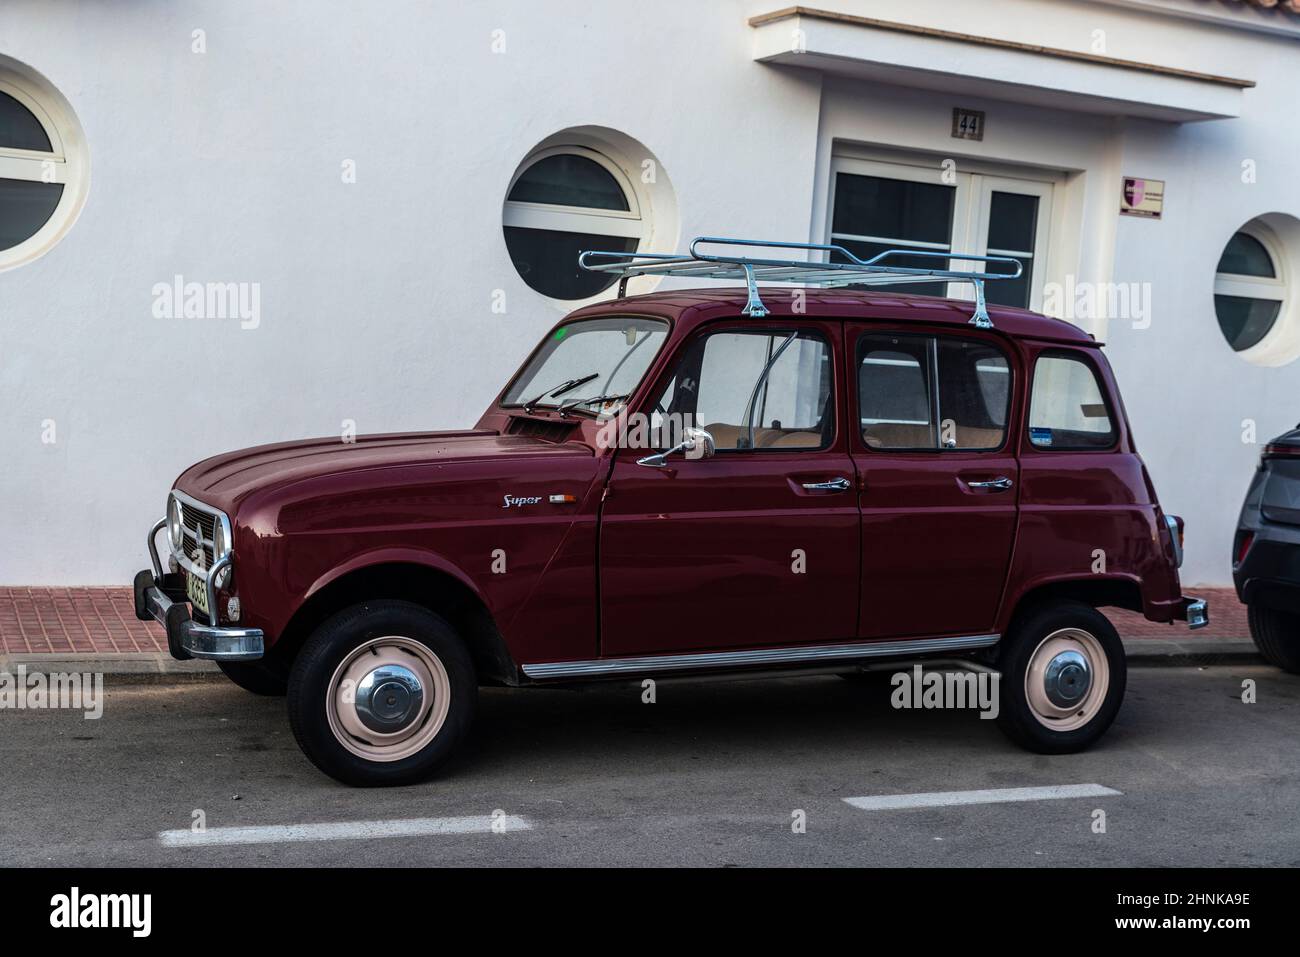 Fornells, Spain - July 20, 2021: Garnet Renault 4 Super car with roof rack parked on a street in Fornells, Menorca, Balearic island, Spain Stock Photo